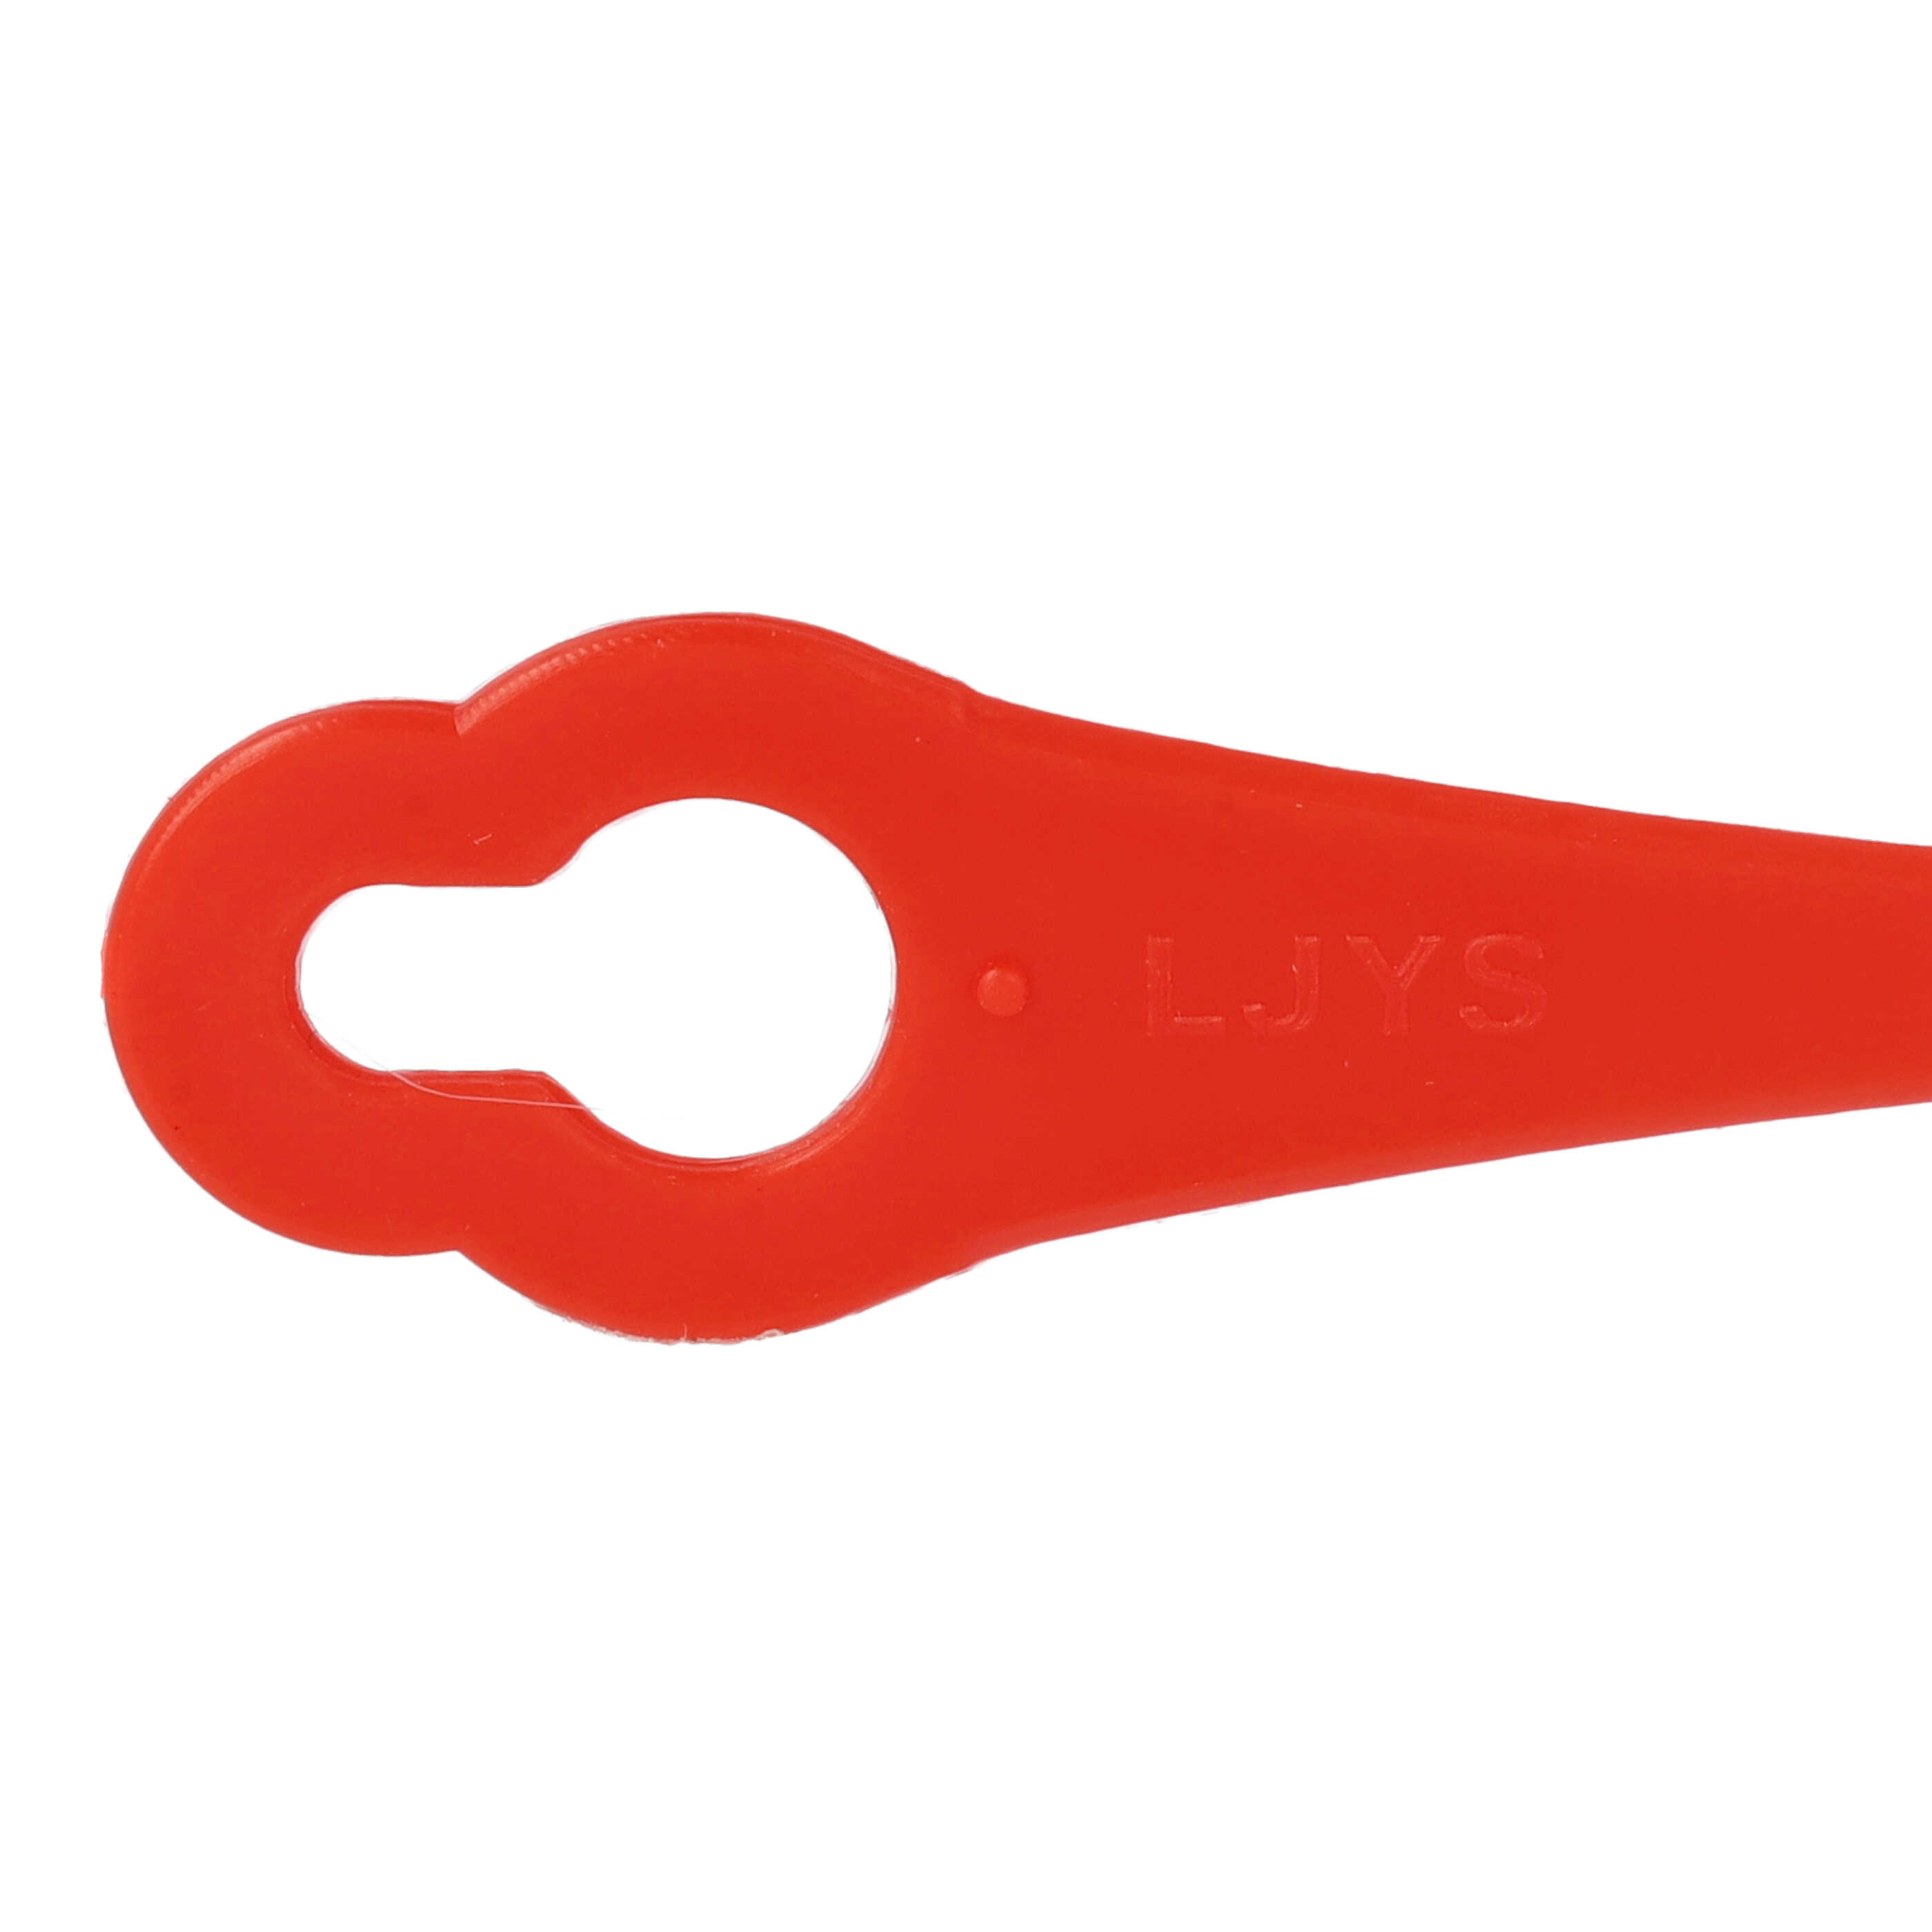 20x Exchange Blade replaces Grizzly 91094326 for Cordless Lawnmower etc. - polyamide, red